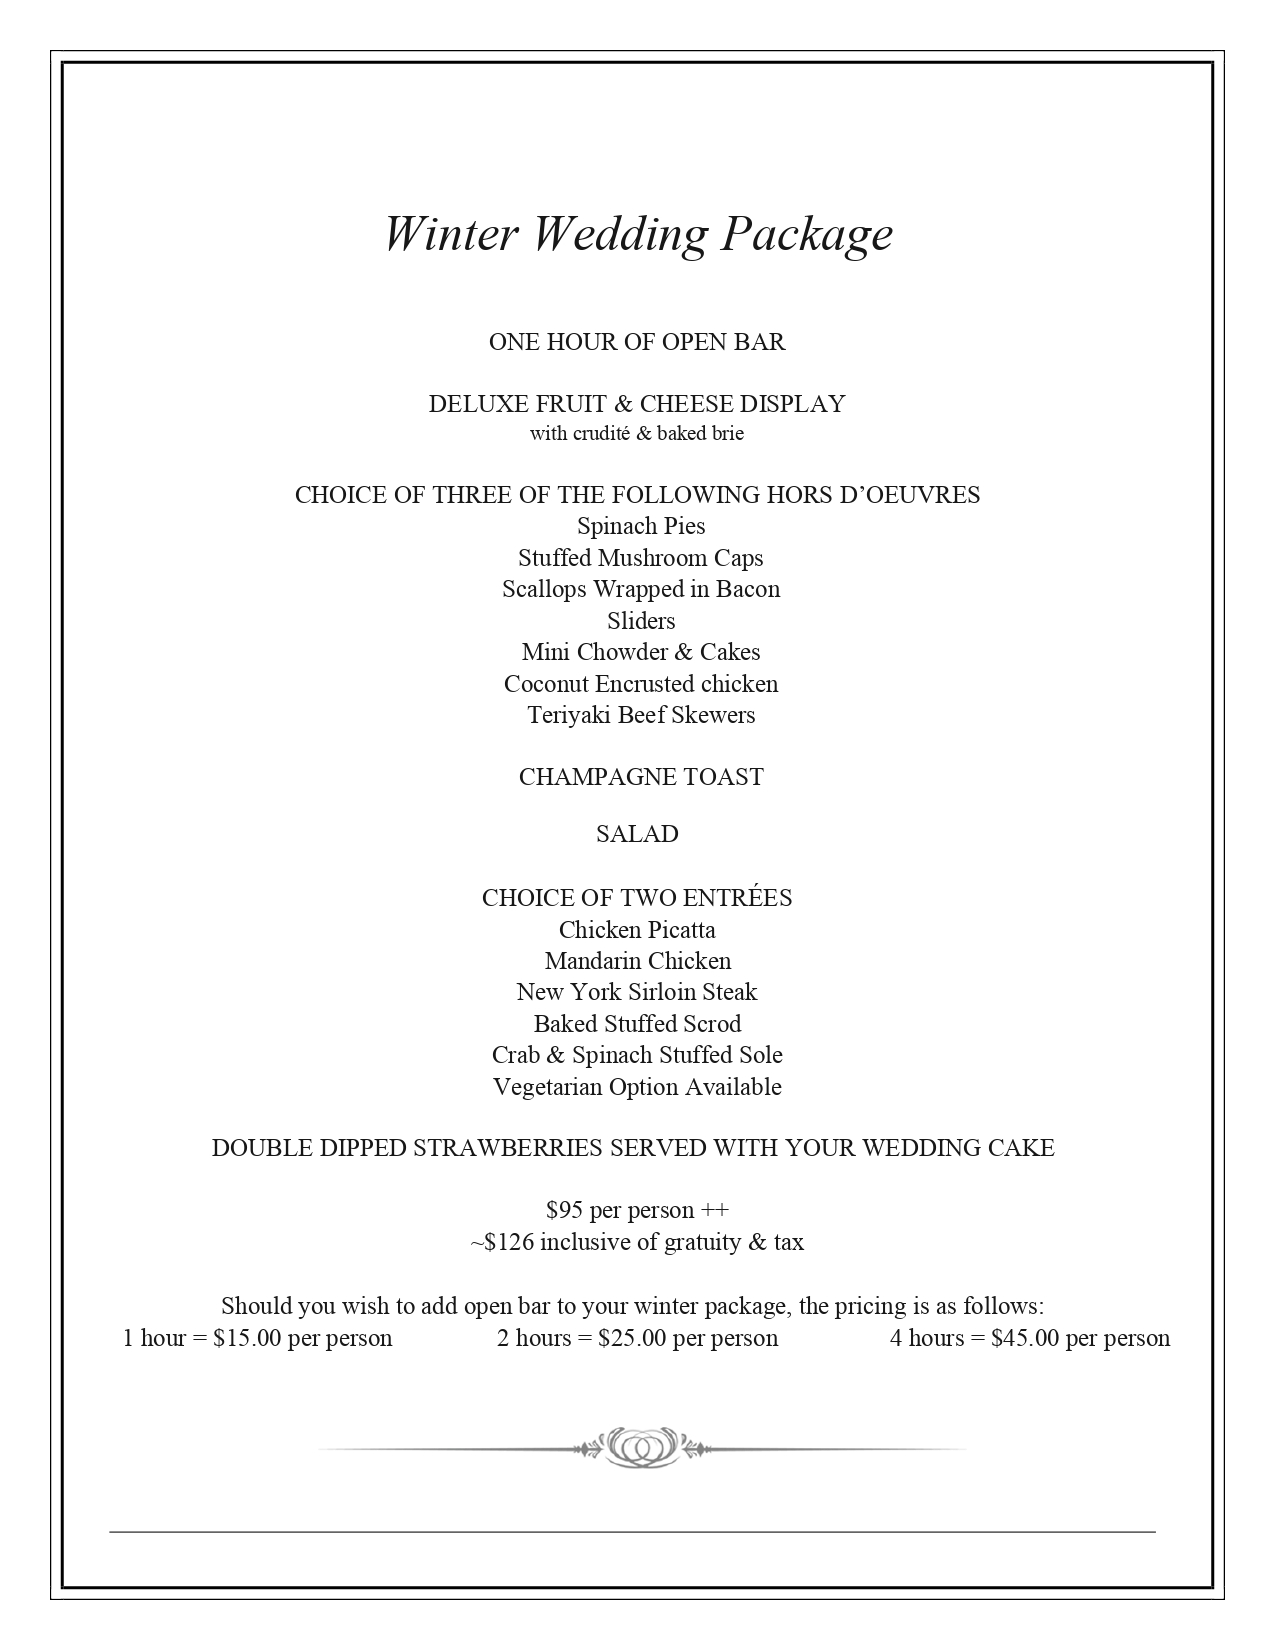 Wedding Packages 10.1.21_page-0007